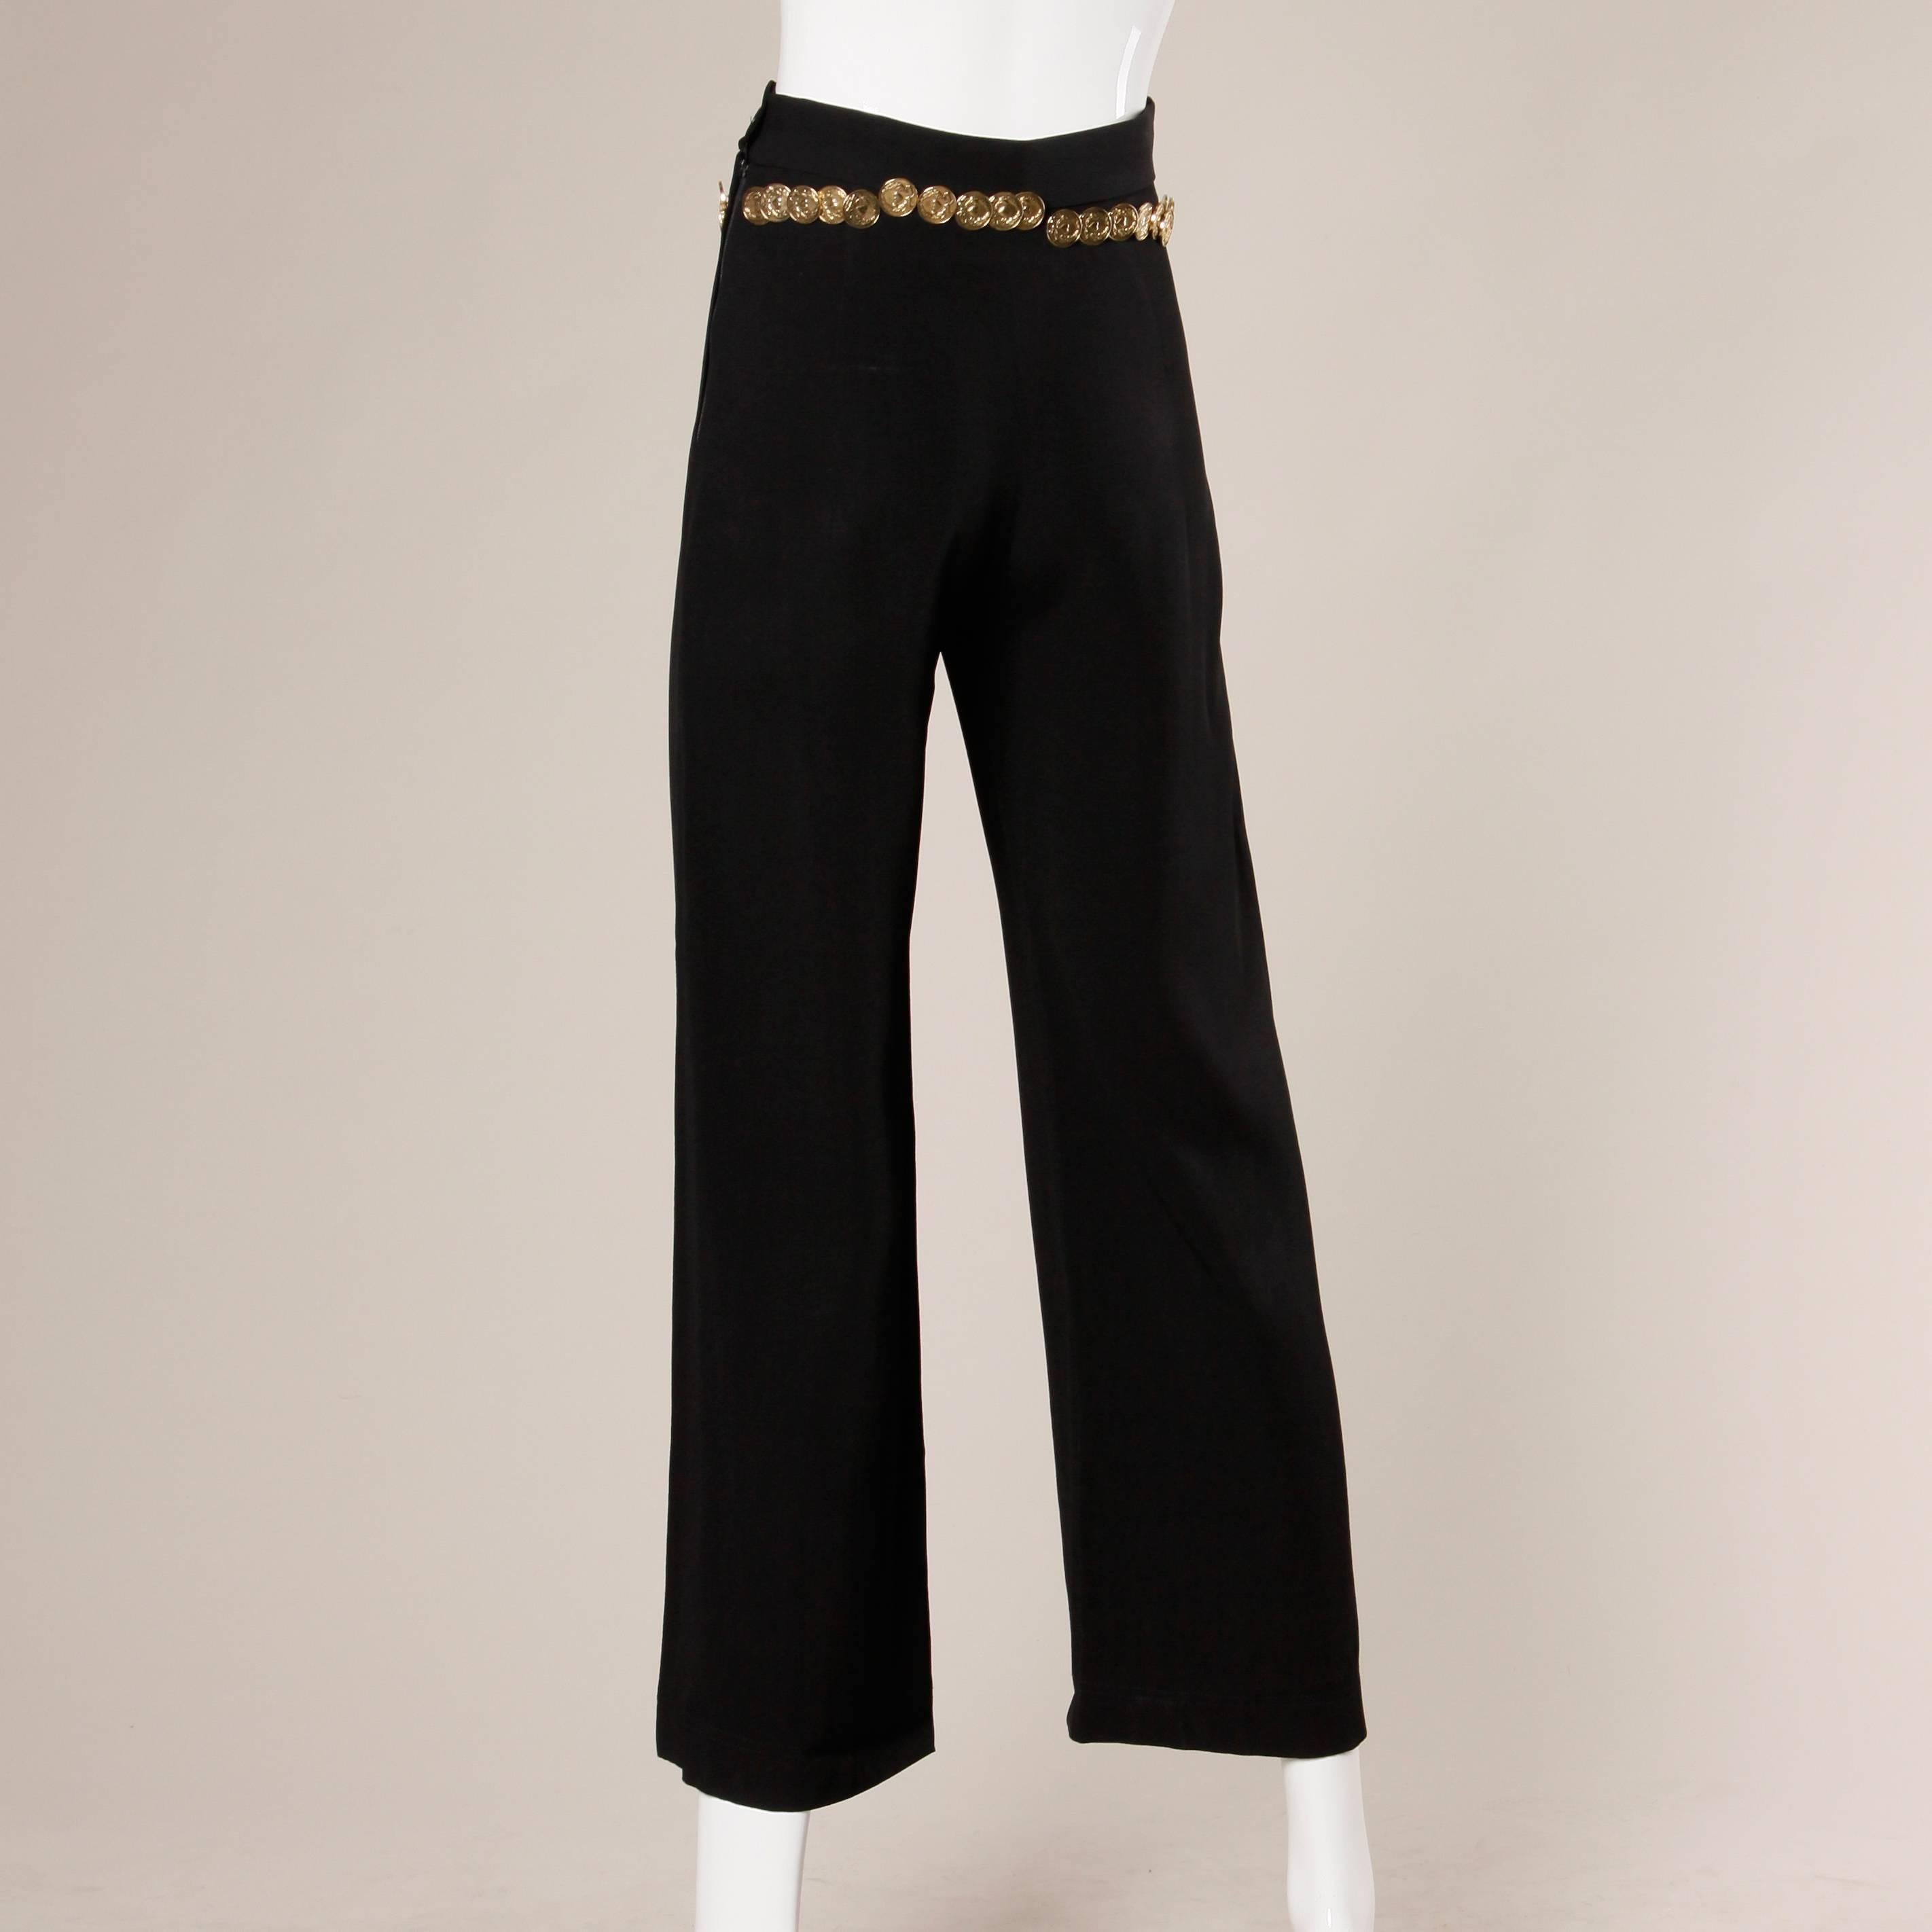 Black Moschino Vintage 90s Wide Leg Palazzo Pants with Coin Chain Belt